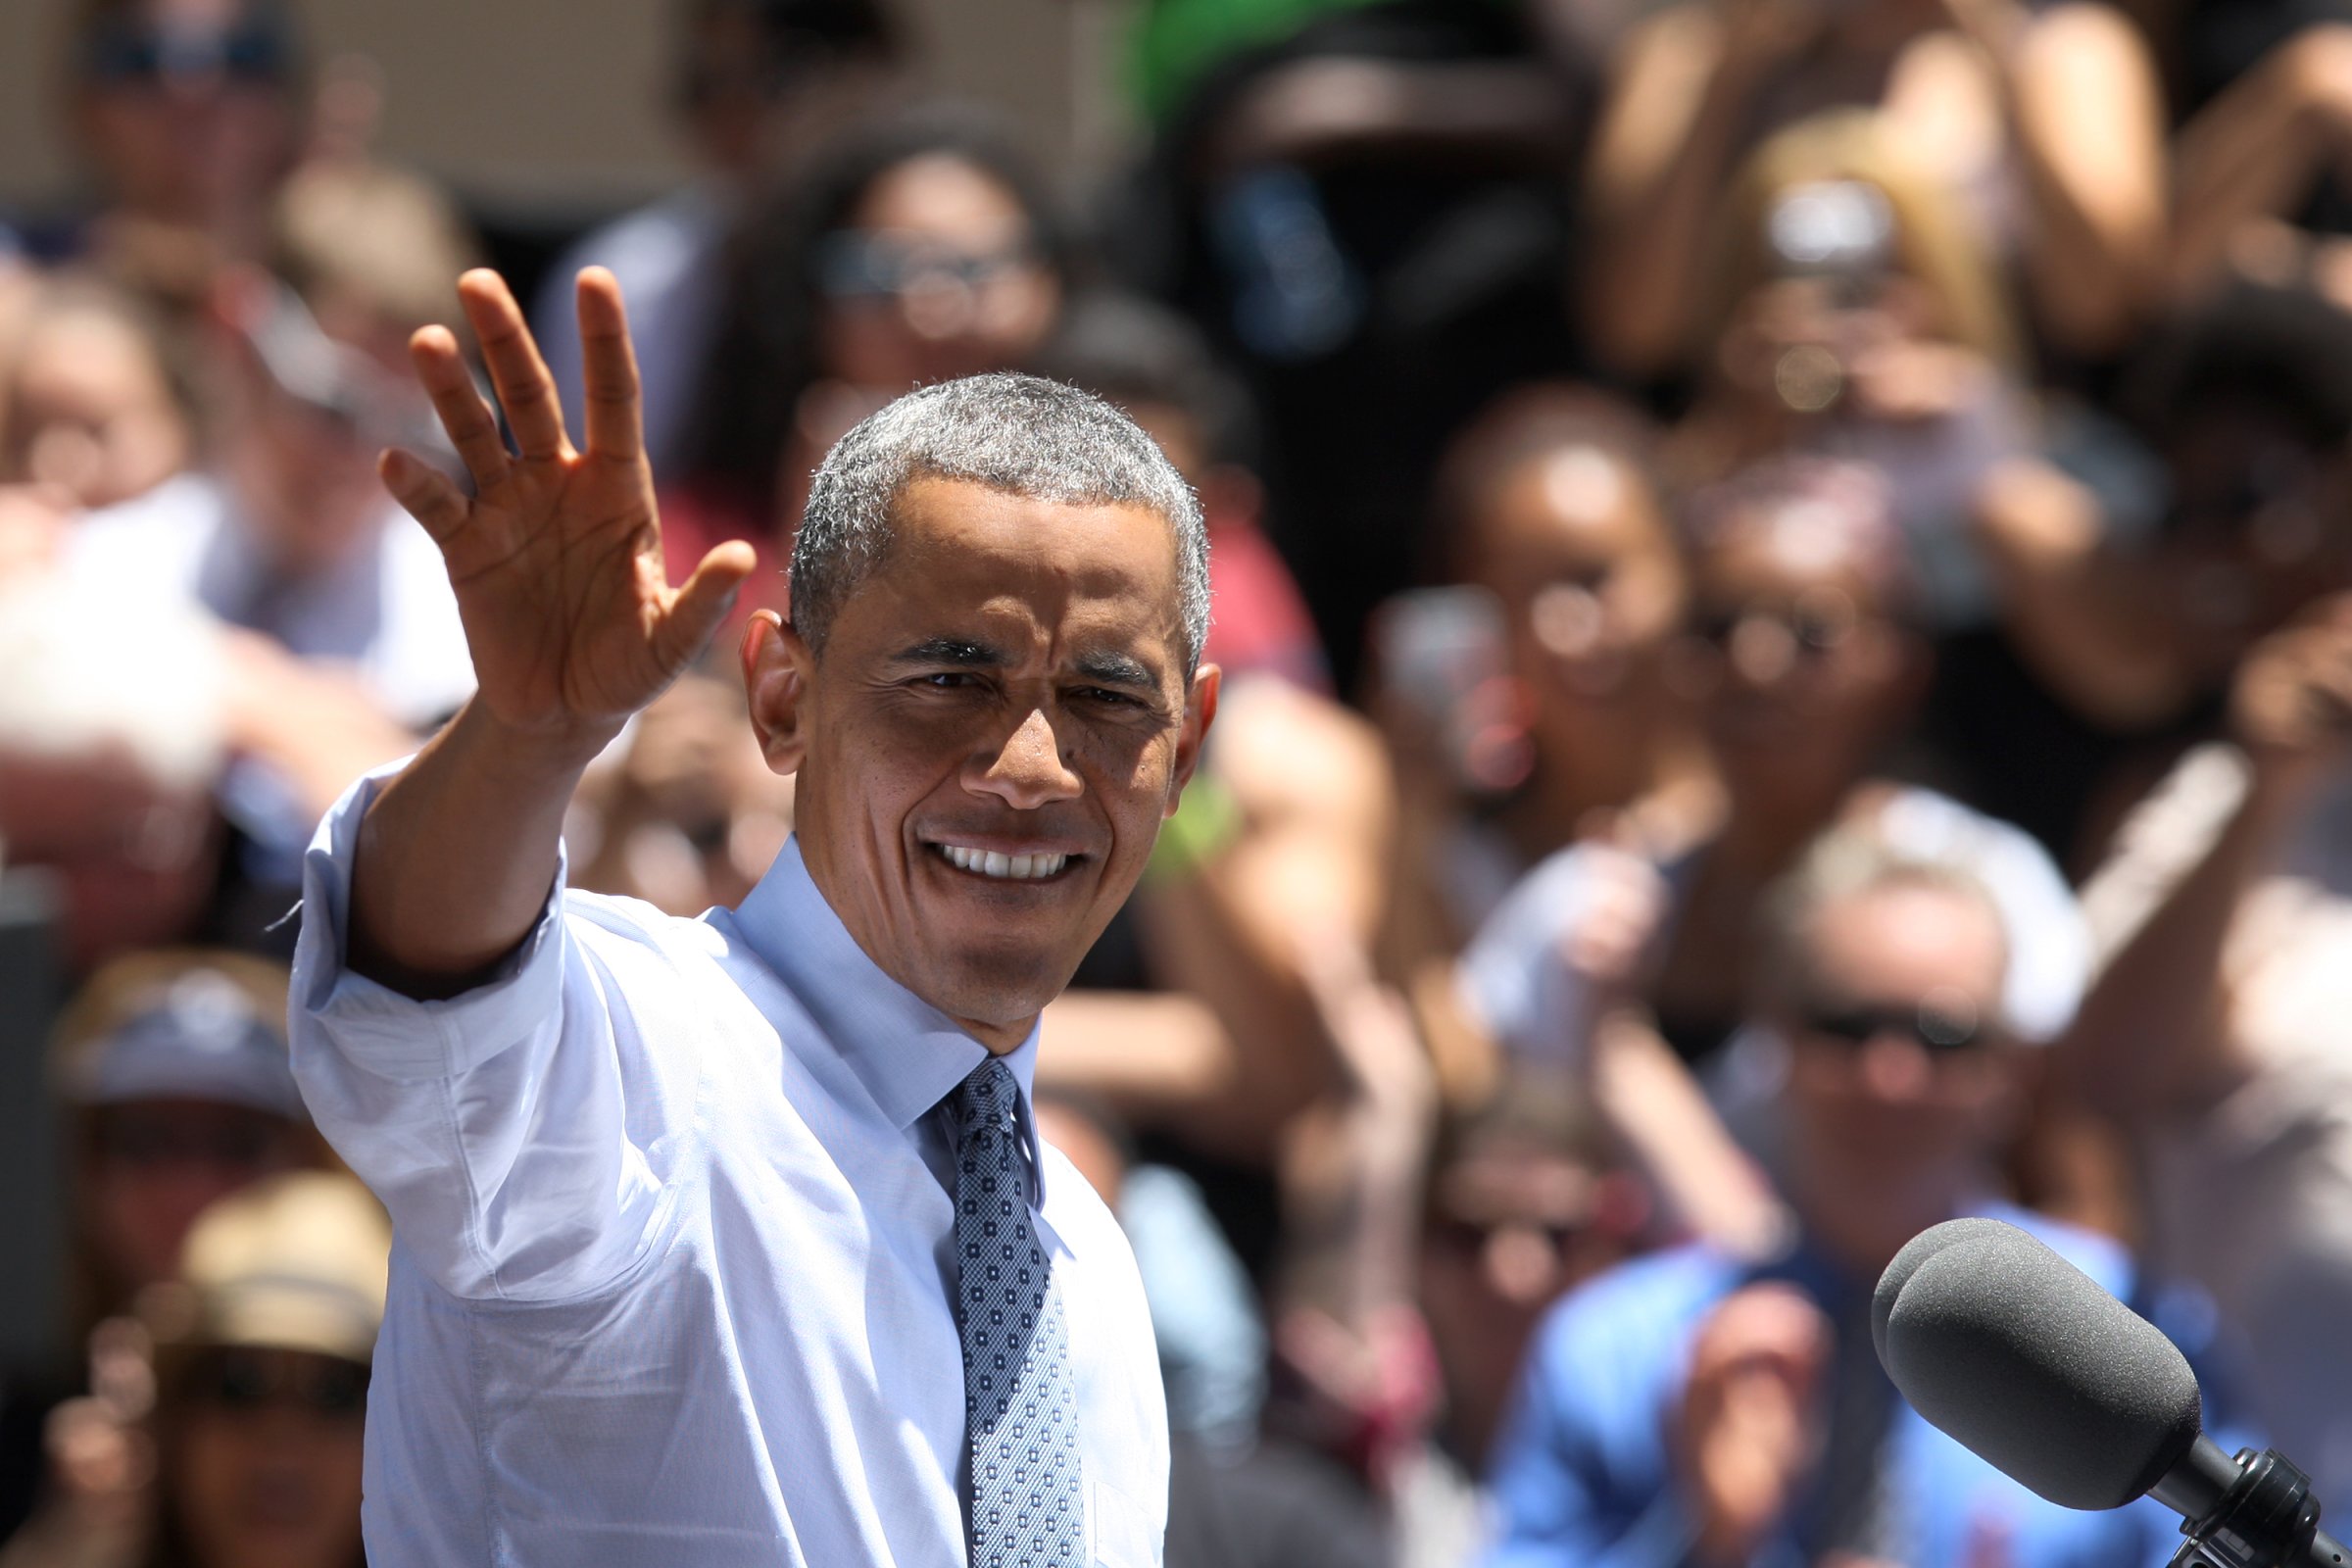 Obama Delivers Economic Address At Los Angeles Trade-Technical College